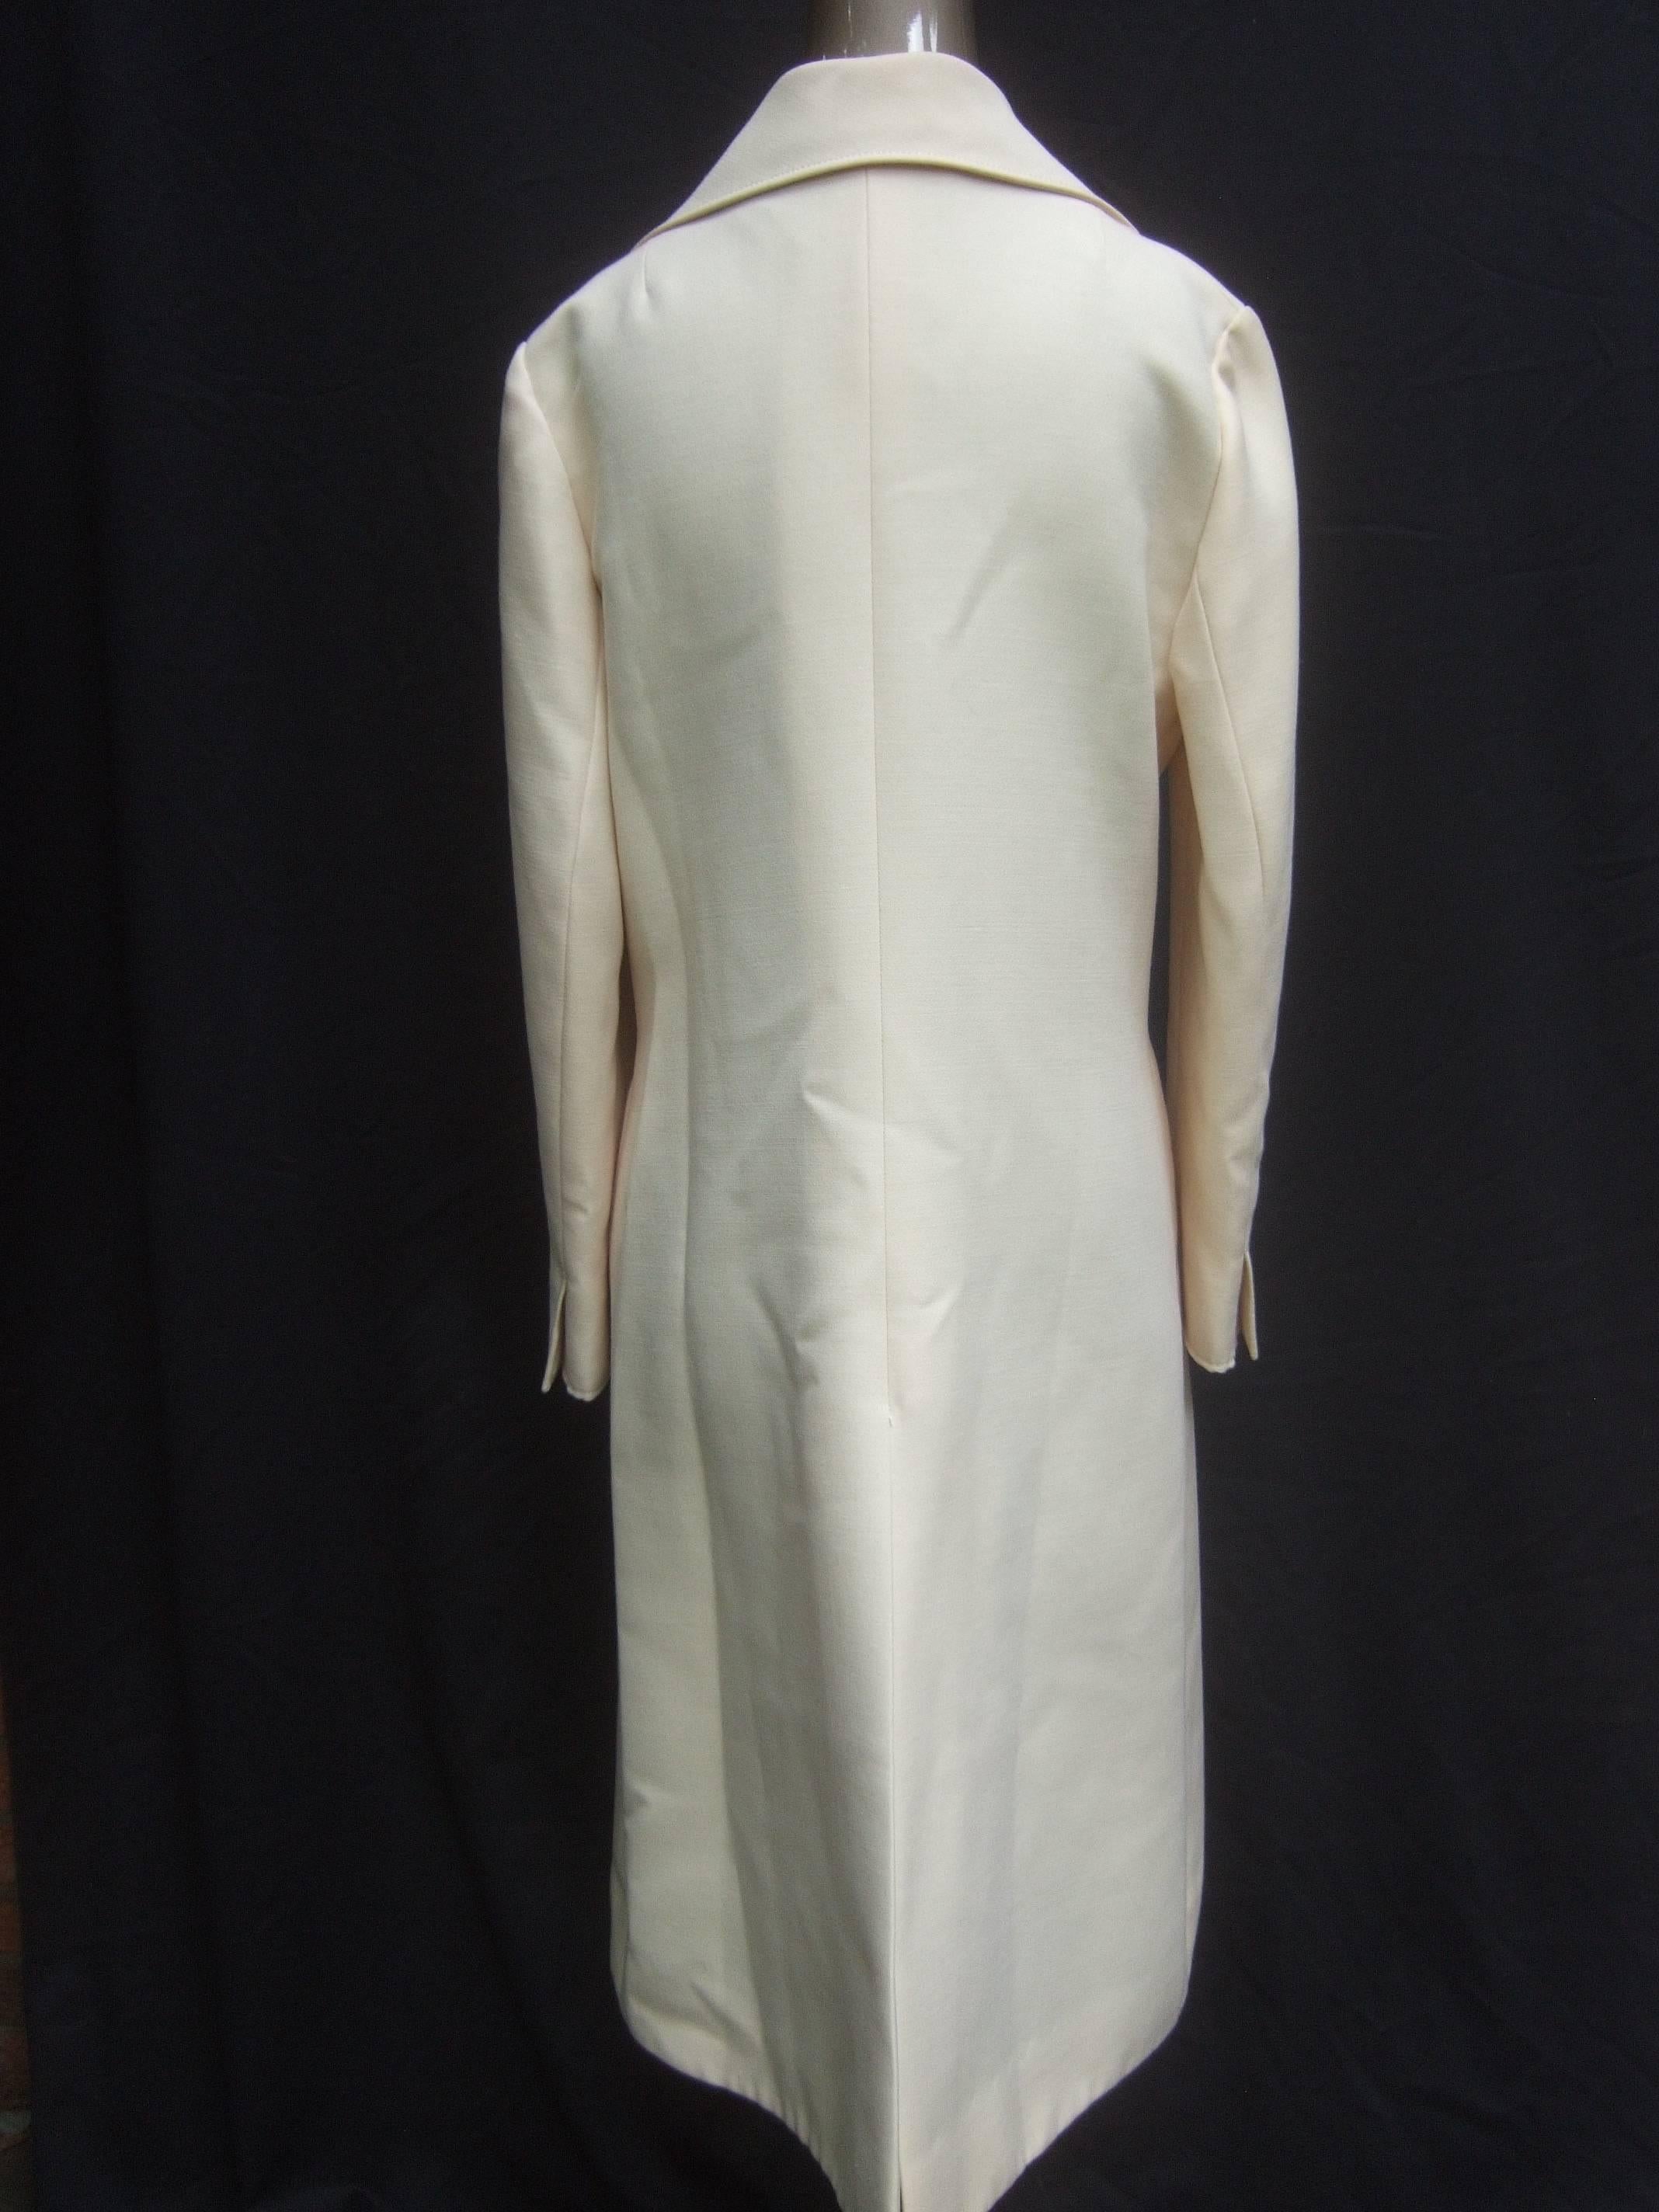 Beautifully tailored 1960's creme wool car coat by Pierre Cardin. Straight cut. Perfect for day into evening. Fully lined. Shiny black enamel buttons. Excellent Condition. Labelled: Creation Pierre Cardin Paris. Measurements:  Length 40.5" 